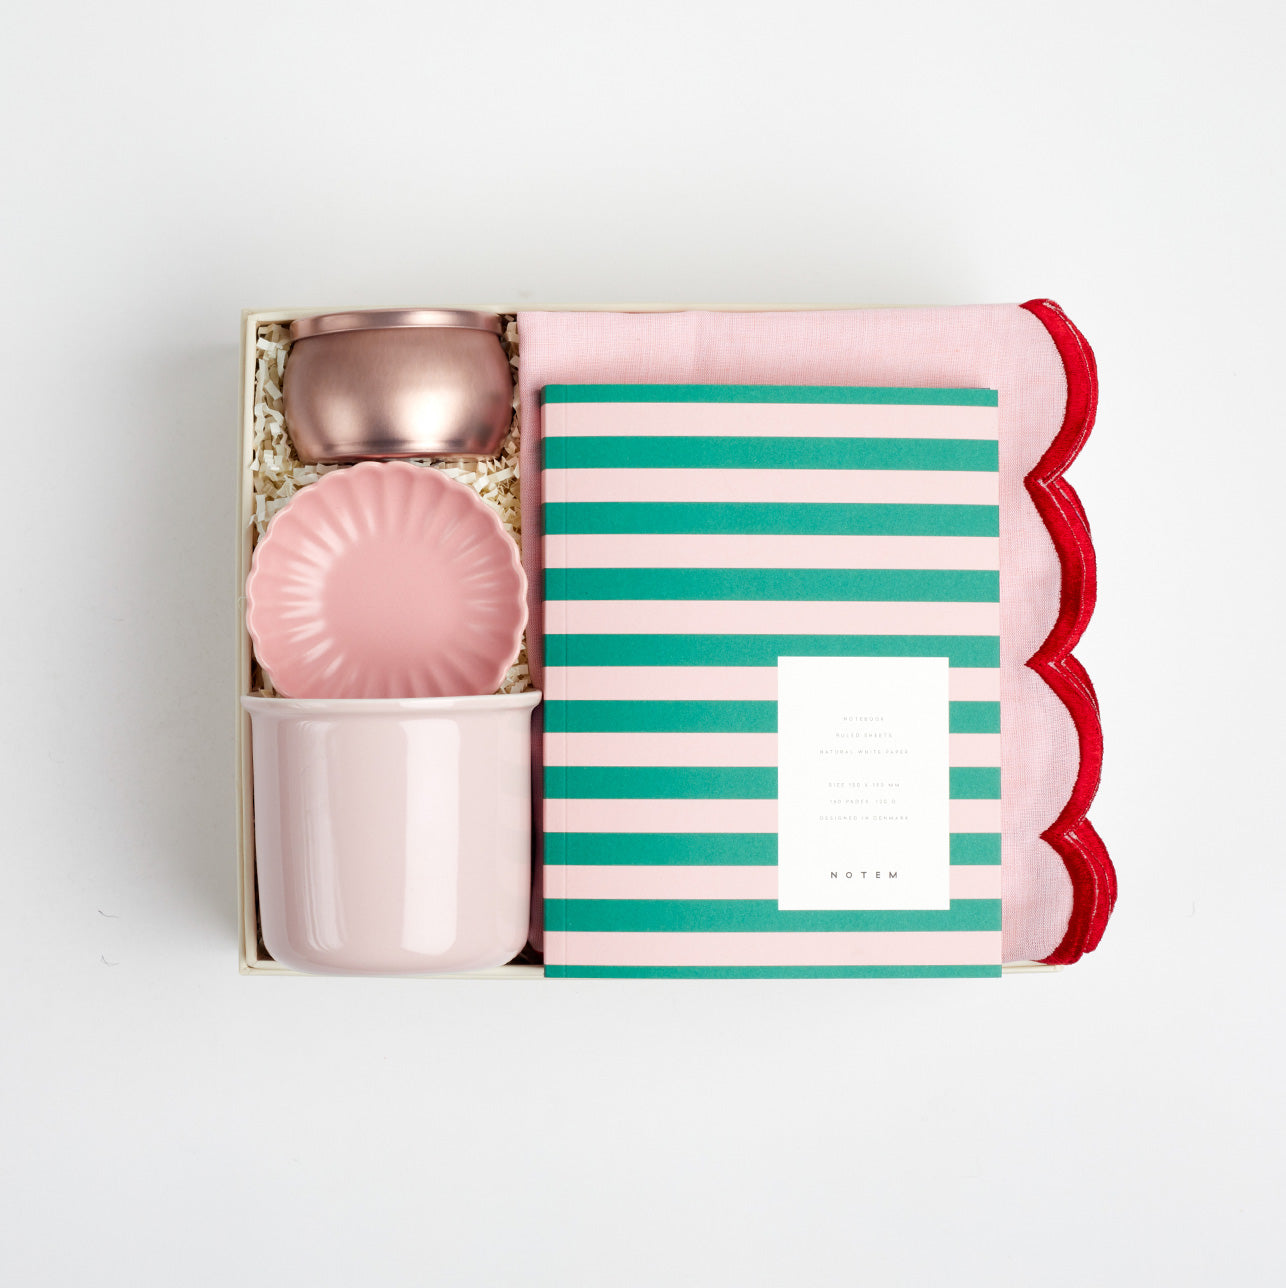 BOXFOX Creme gift box packed with voluspa sparkling rose candle, pink scallop trinket tray, pink mug, green and pink stripe notem and pink two tone scallop tea towel